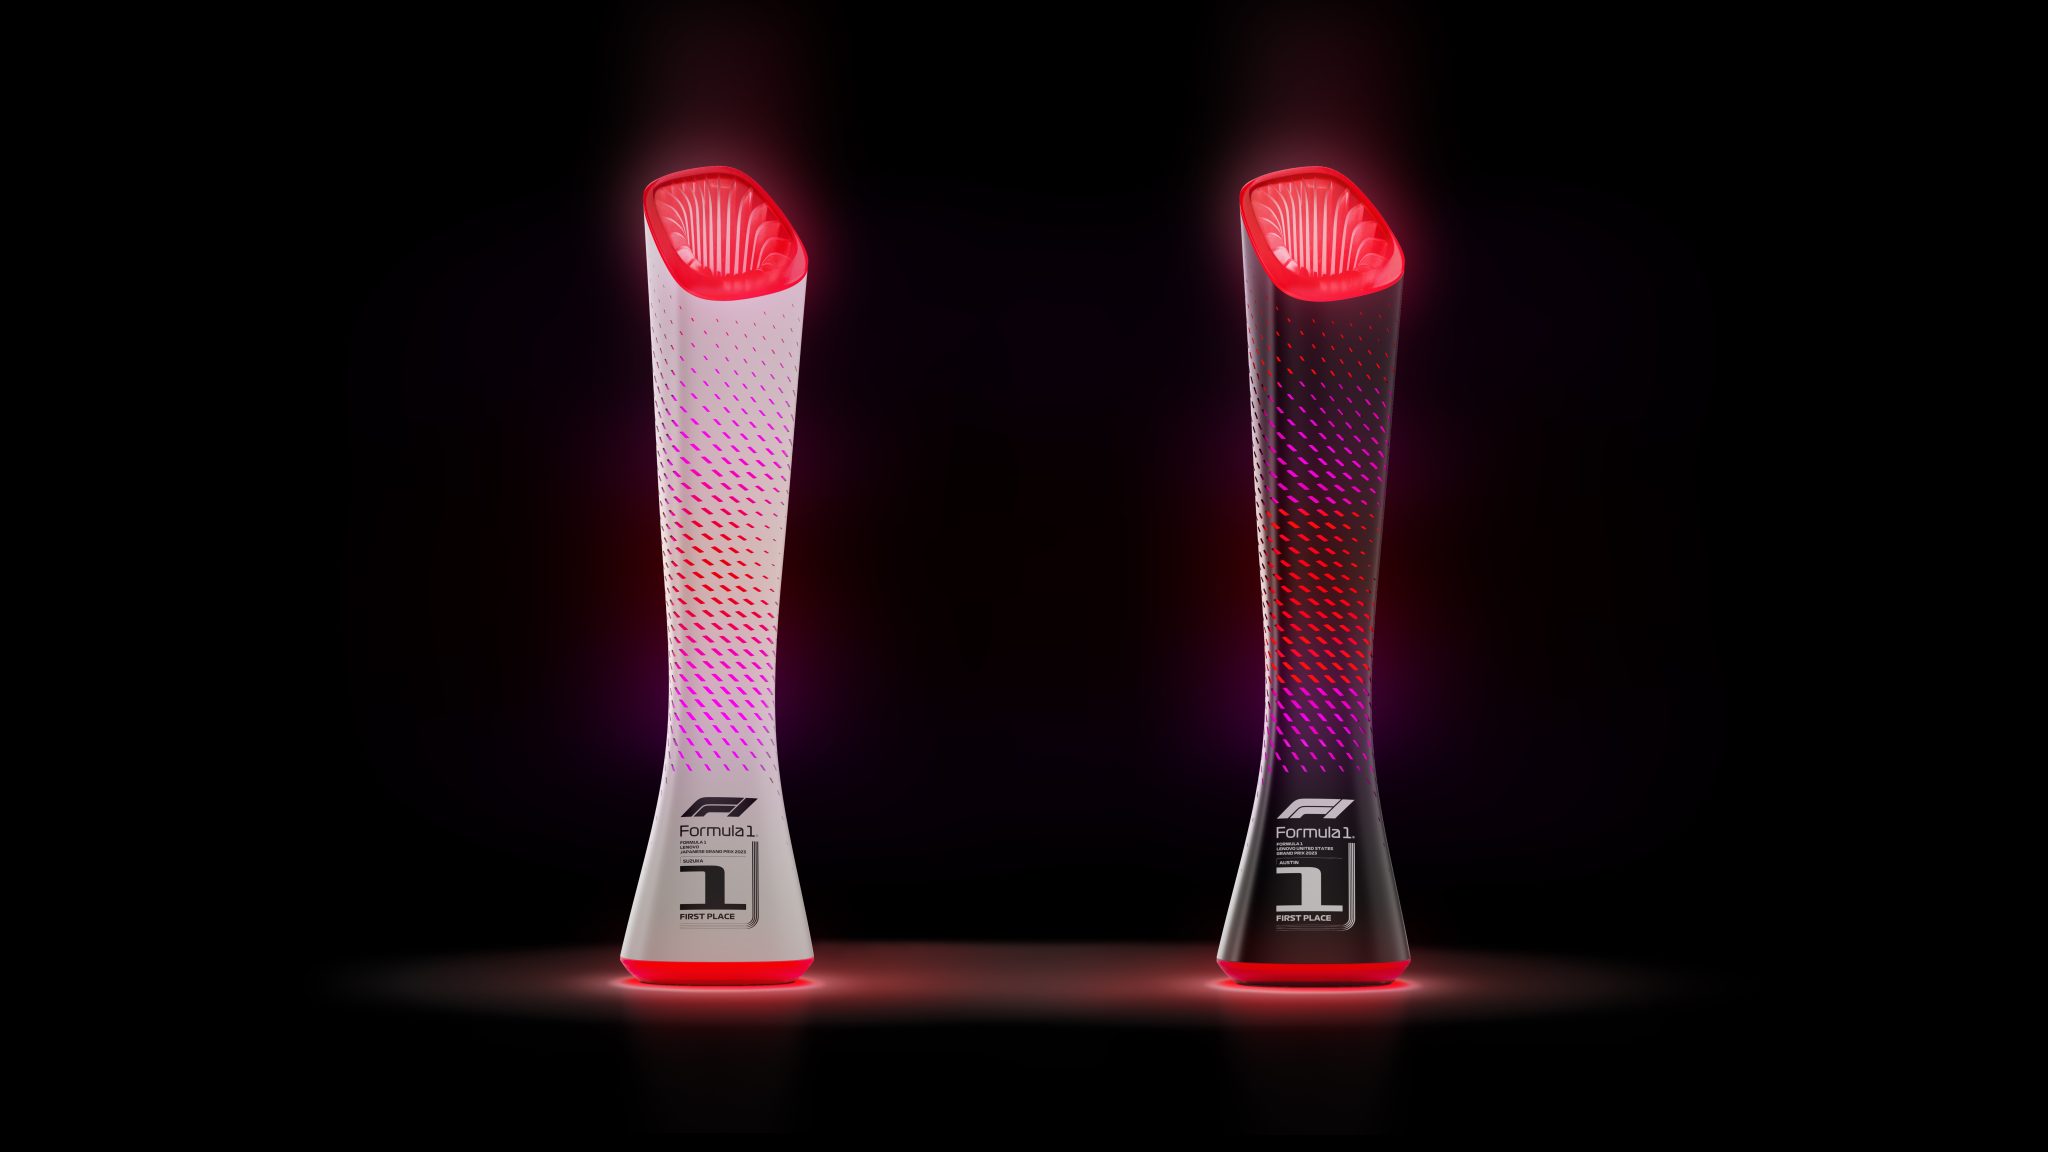 Lenovo reimagines Formula 1® tradition with world's first kiss-activated  trophy - Lenovo StoryHub